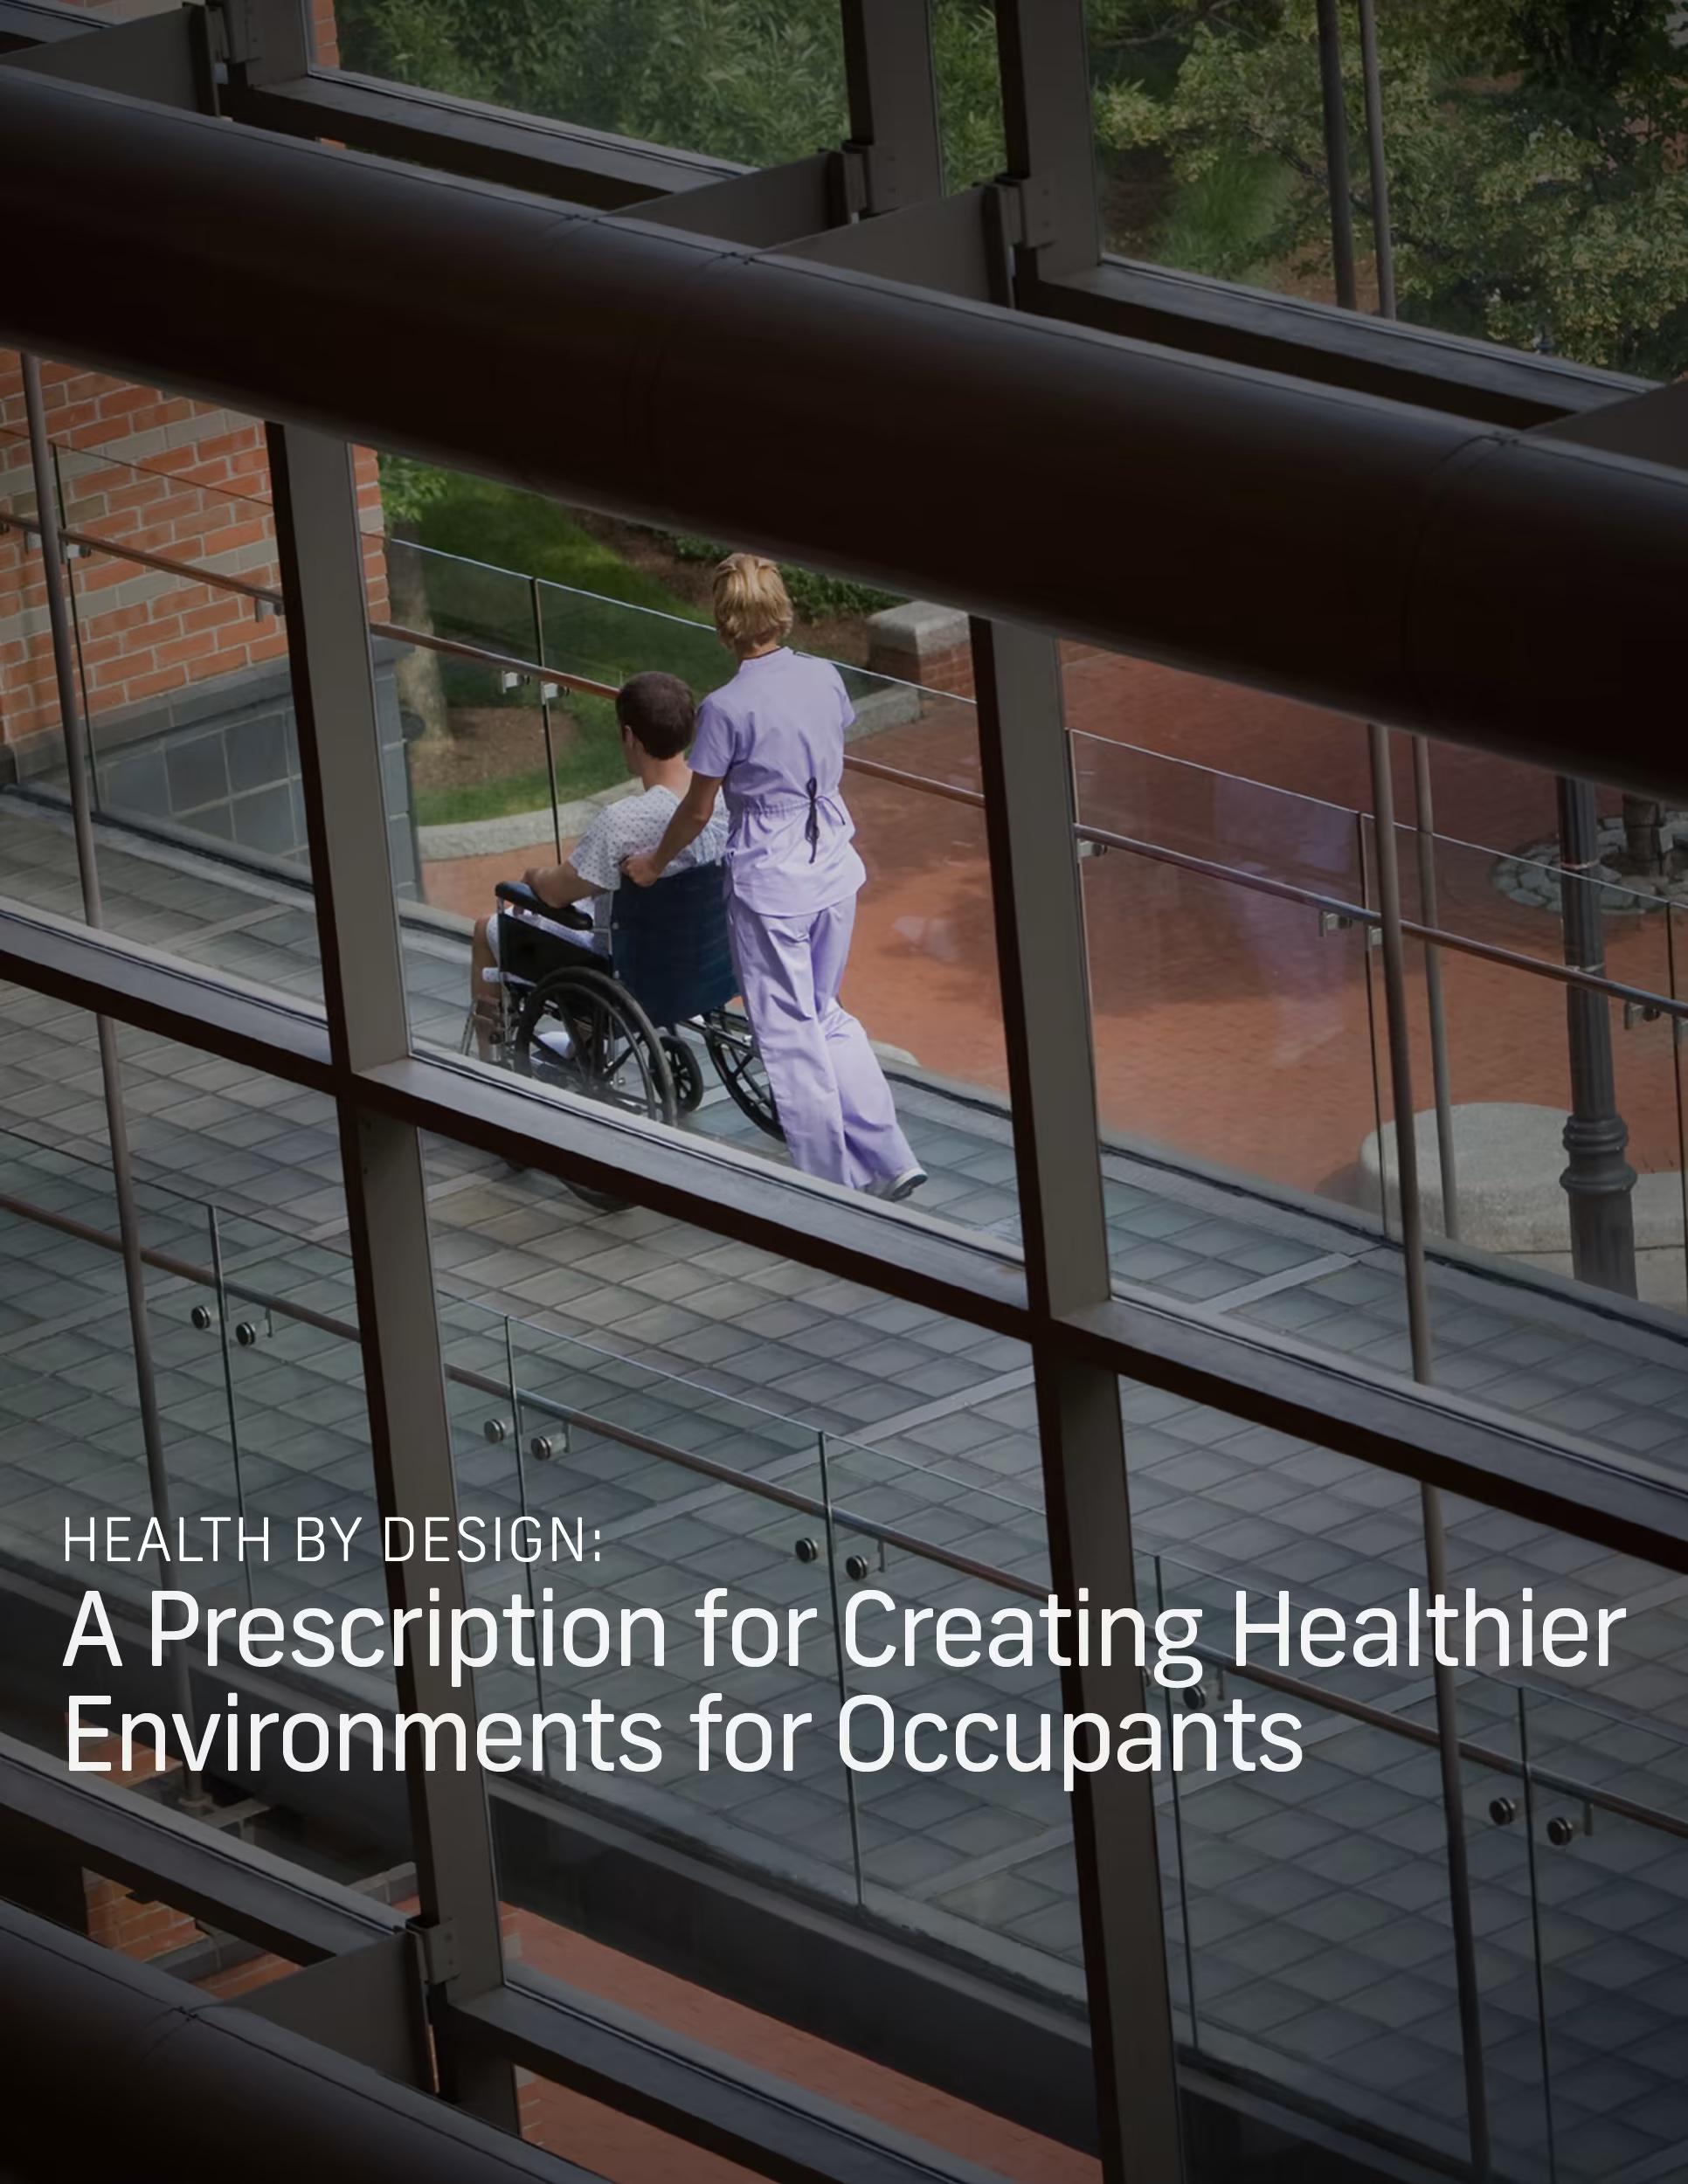 Health by Design Cover image shows healthcare worker pushing patient in outdoor hosptial campus setting